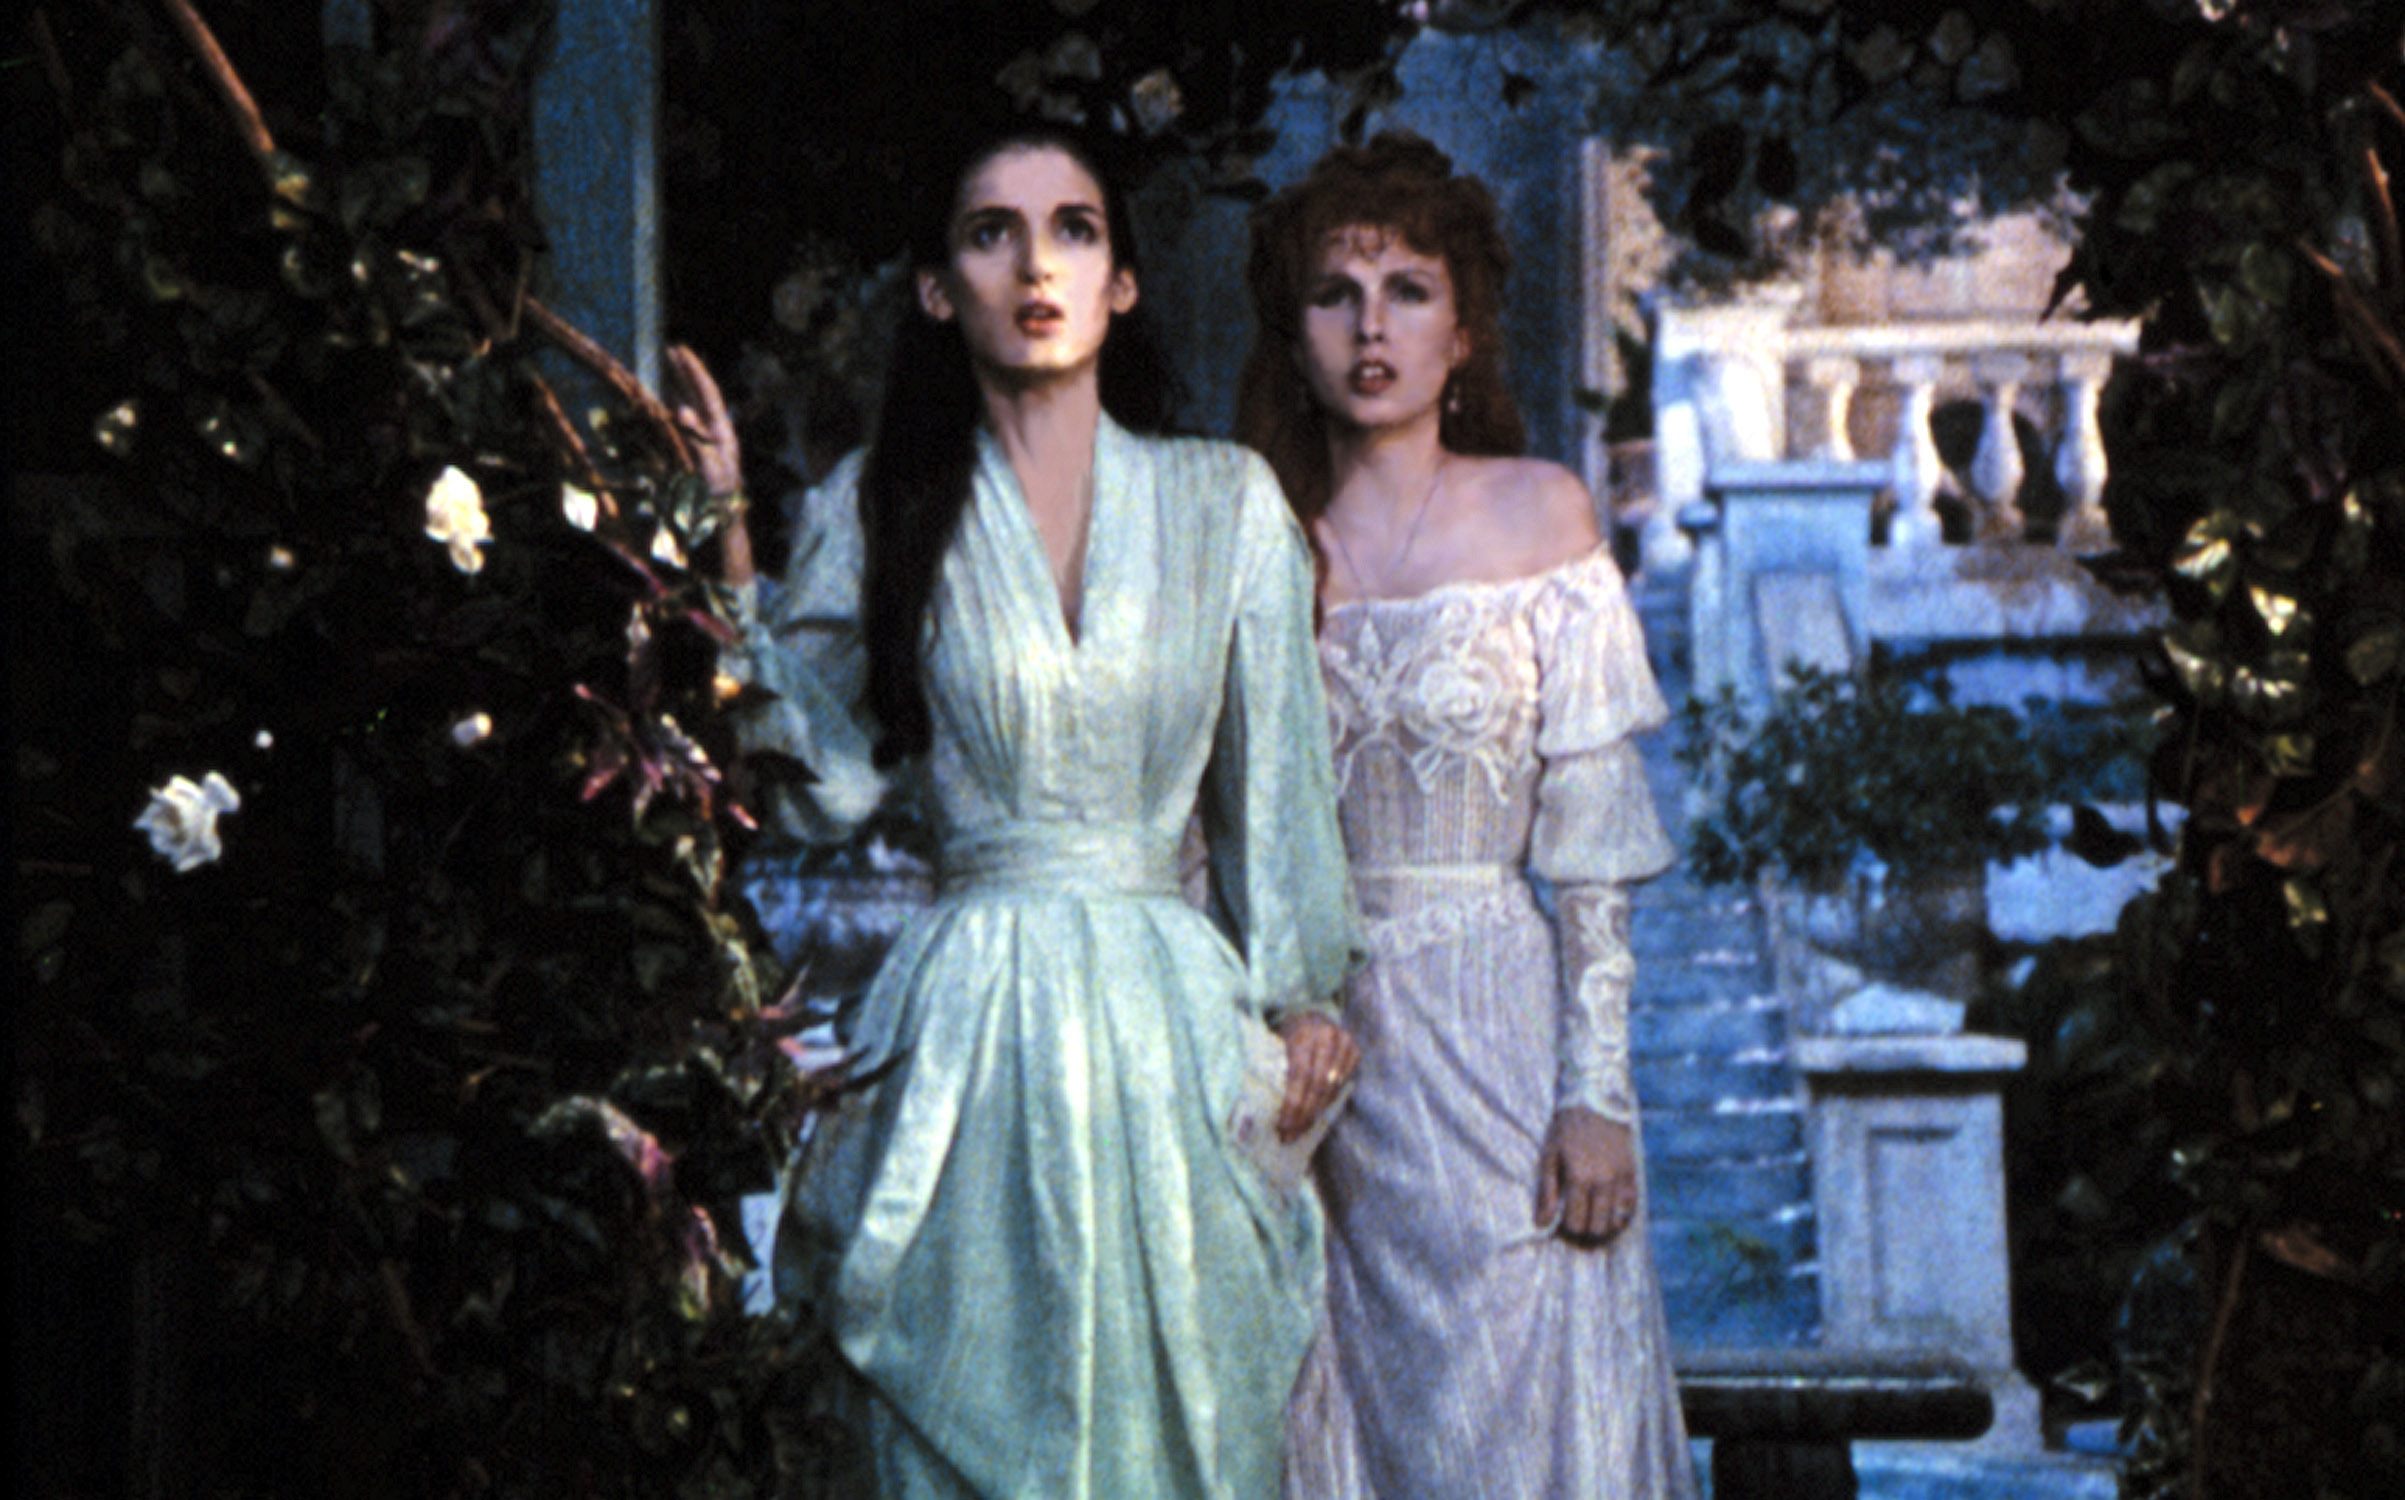 Two women in Victorian-style dresses look surprised in a scene from a film